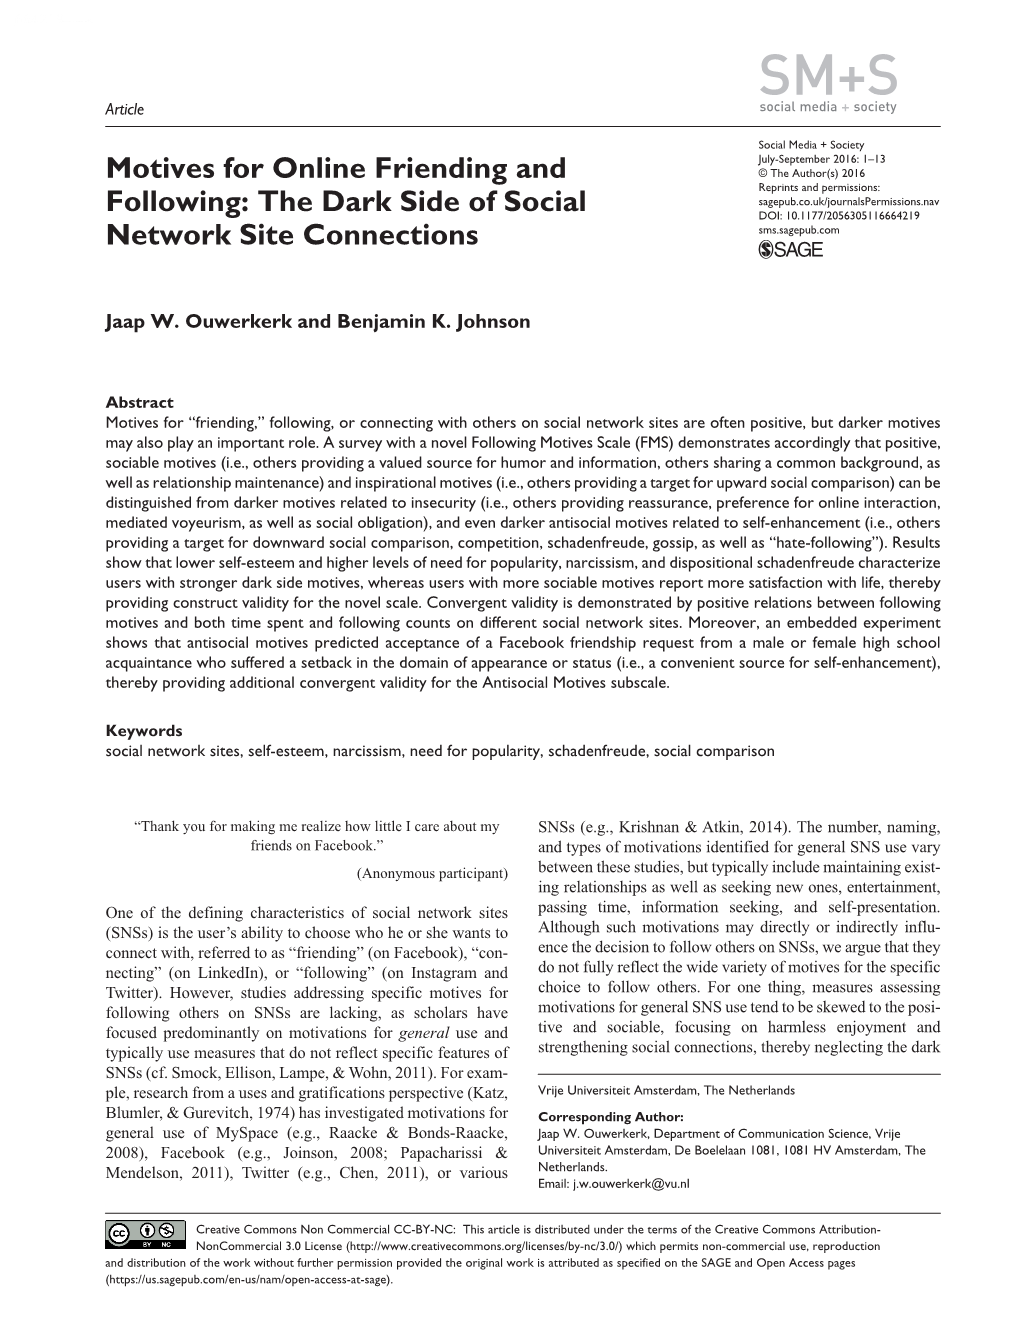 Motives for Online Friending and Following: the Dark Side of Social